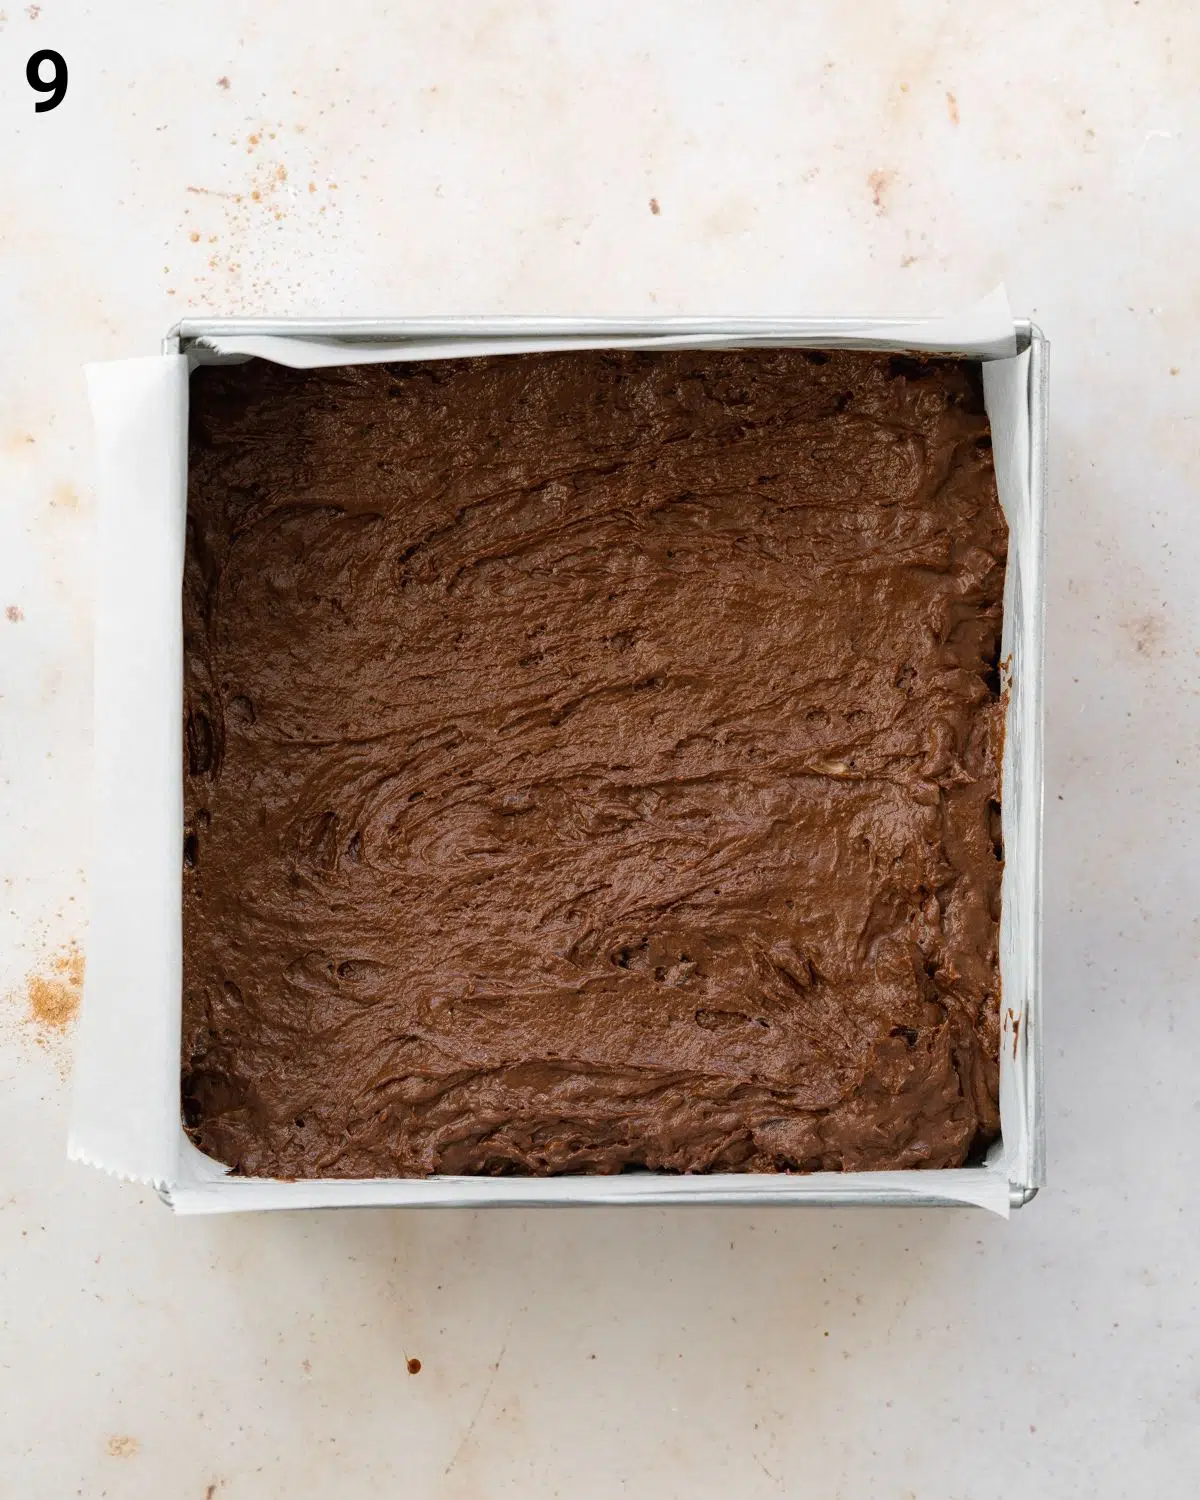 brownie batter in a square pan.